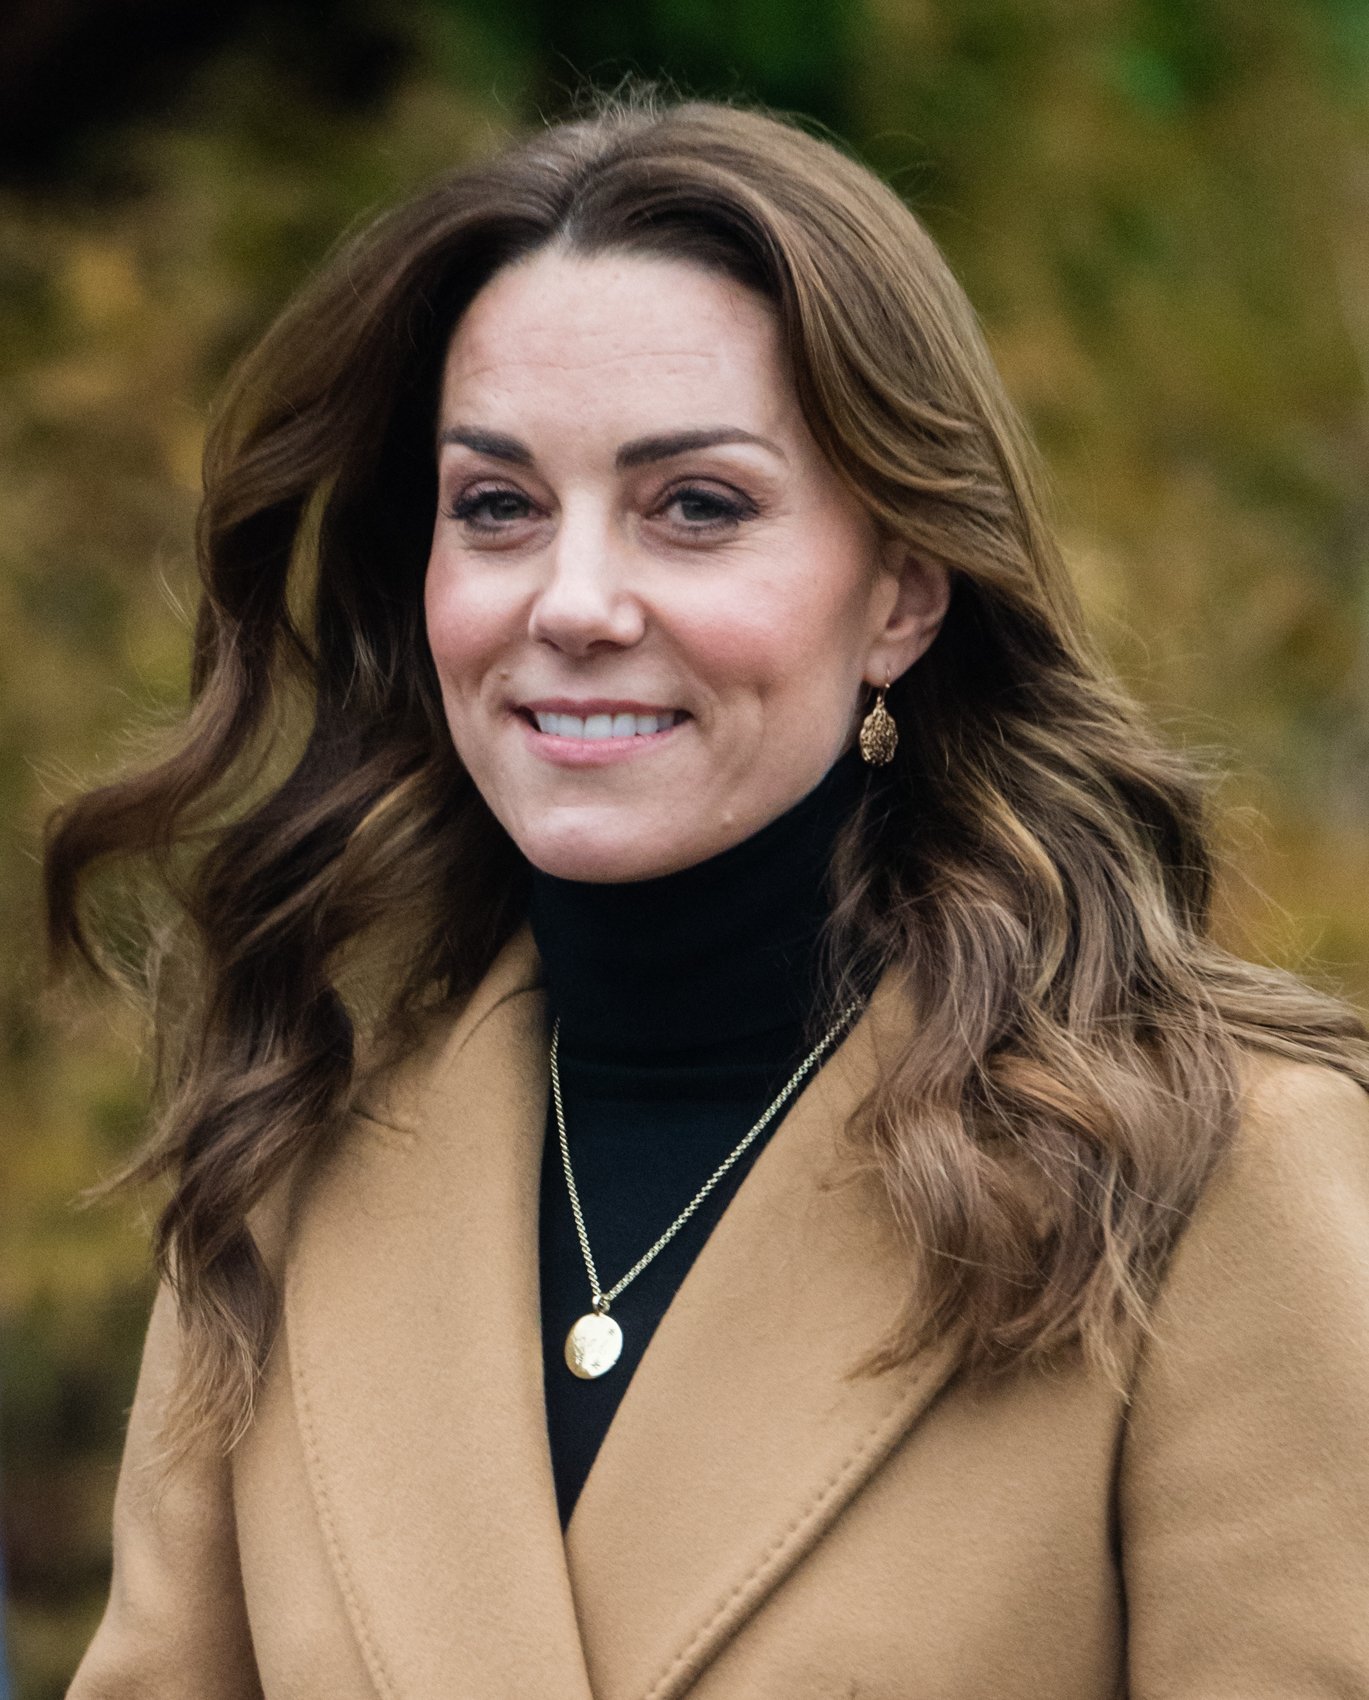 As part of her 24 hour tour of the UK, Kate Middleton visited the HMP, on January 22, 2020 in Woking, England | Source: Getty Images (Photo by Samir Hussein/WireImage)